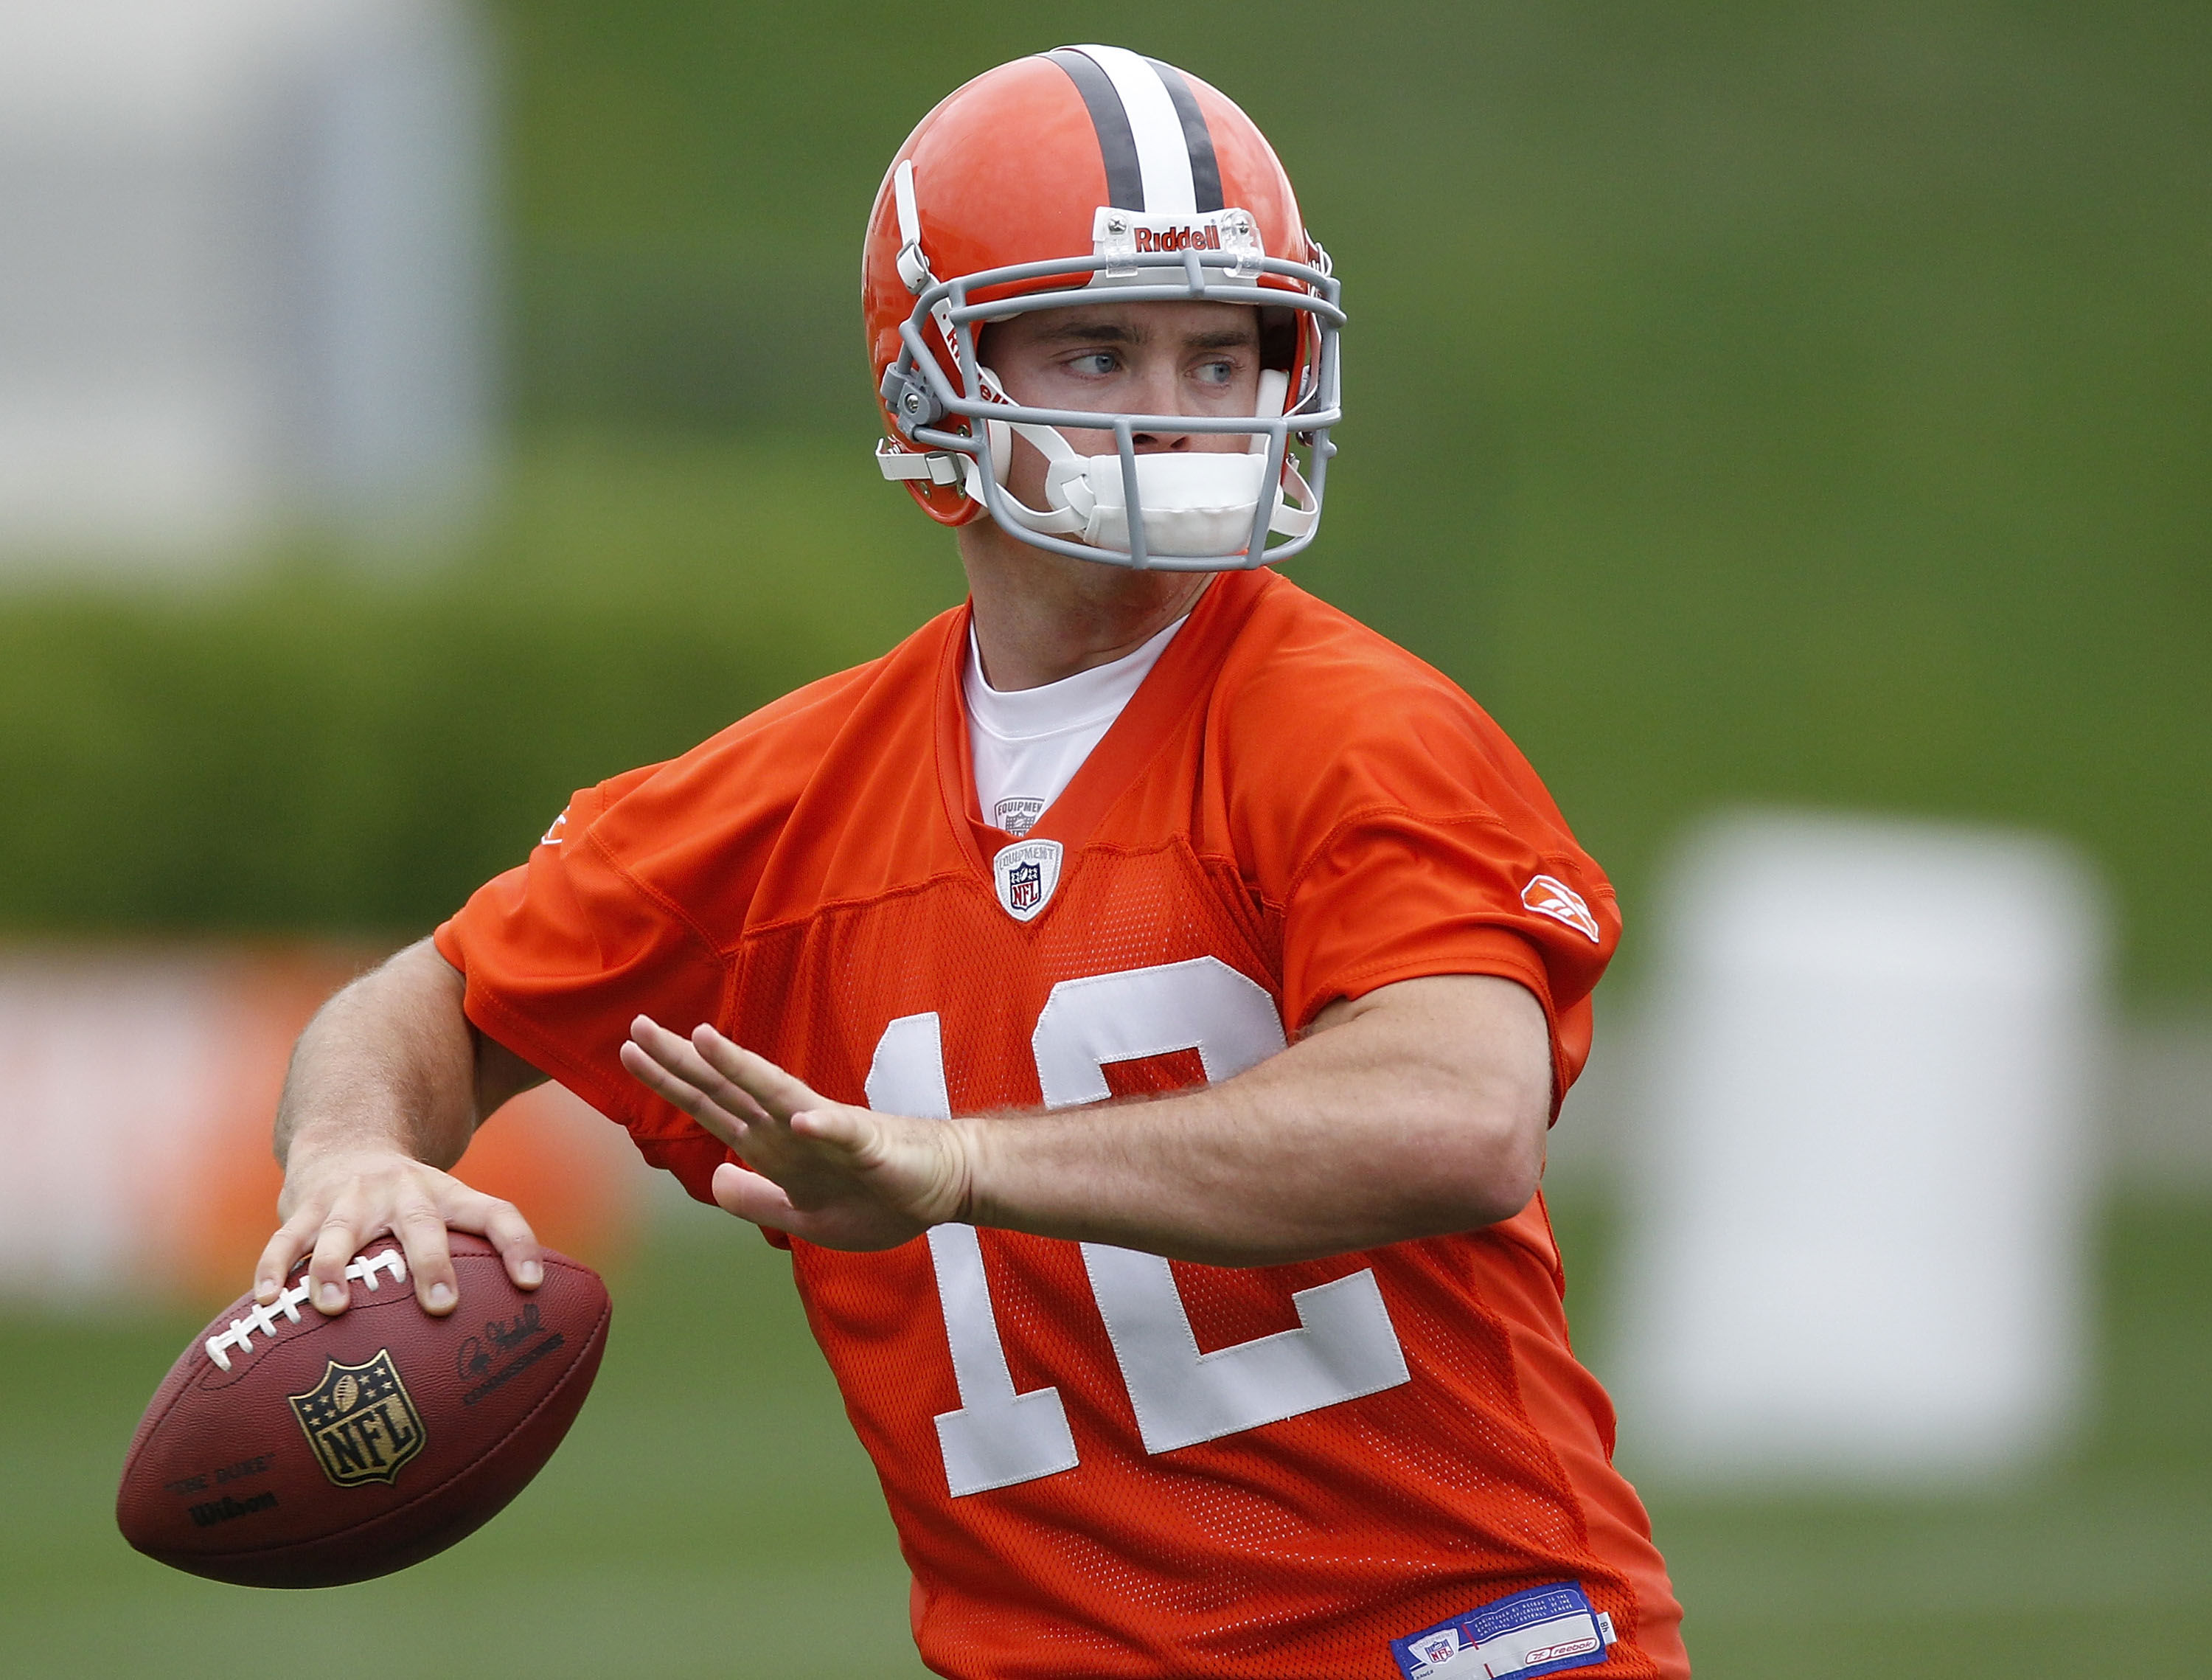 BEREA, OH - MAY 01:  Colt McCoy #12 of the Cleveland Browns gets ready to throw a pass during rookie mini camp at the Cleveland Browns Training and Administrative Complex on May 1, 2010 in Berea, Ohio.  (Photo by Gregory Shamus/Getty Images)